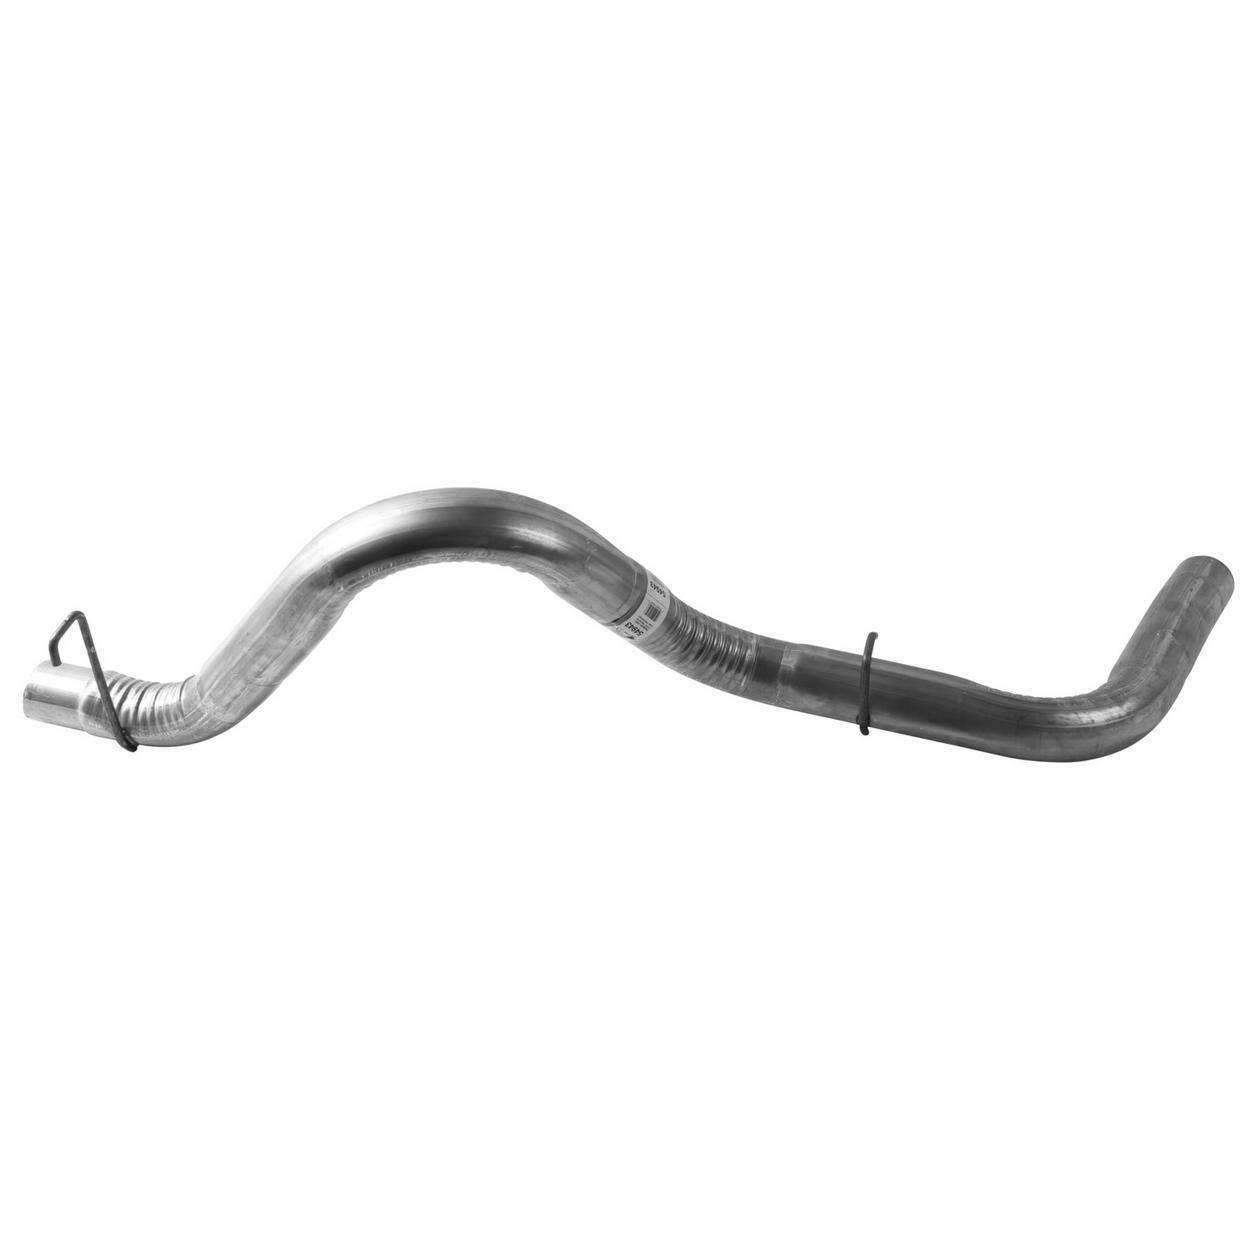 54943-AX Exhaust Tail Pipe Fits 1996-1999 GMC K2500 Suburban 5.7L V8 GAS OHV